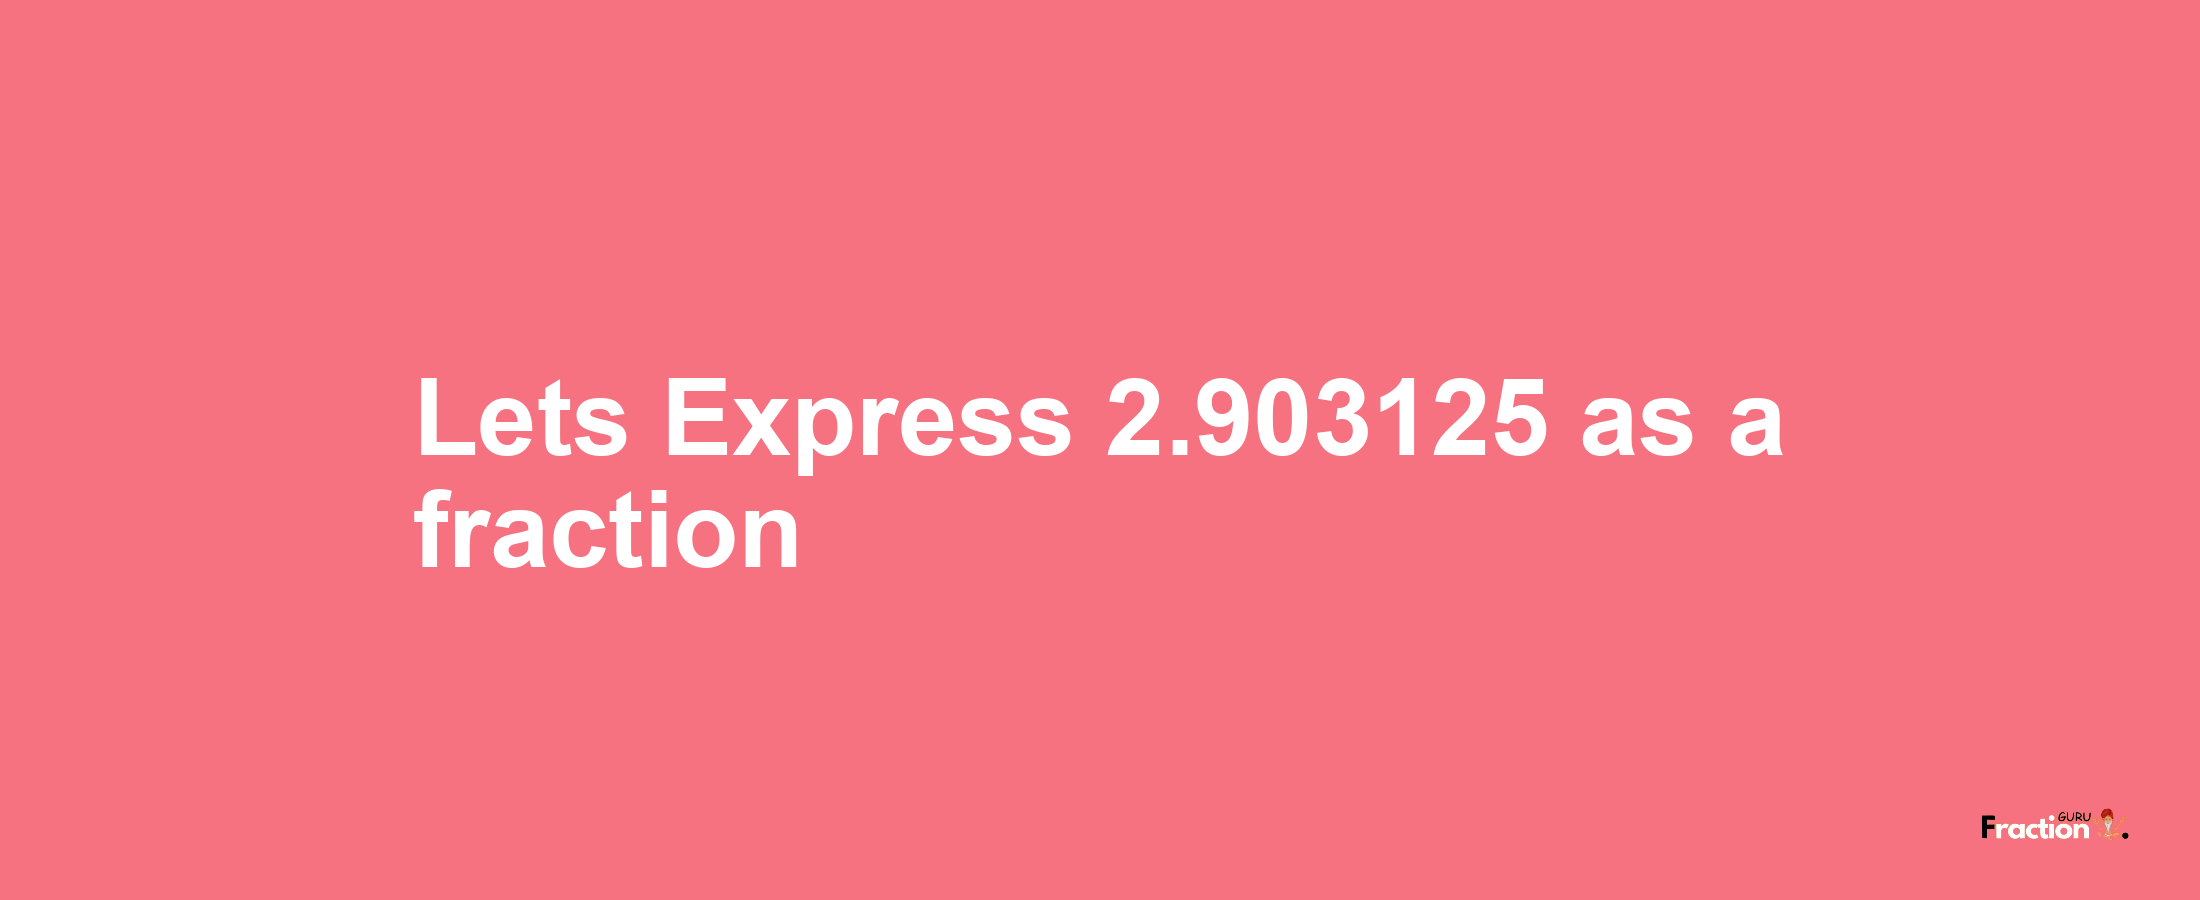 Lets Express 2.903125 as afraction